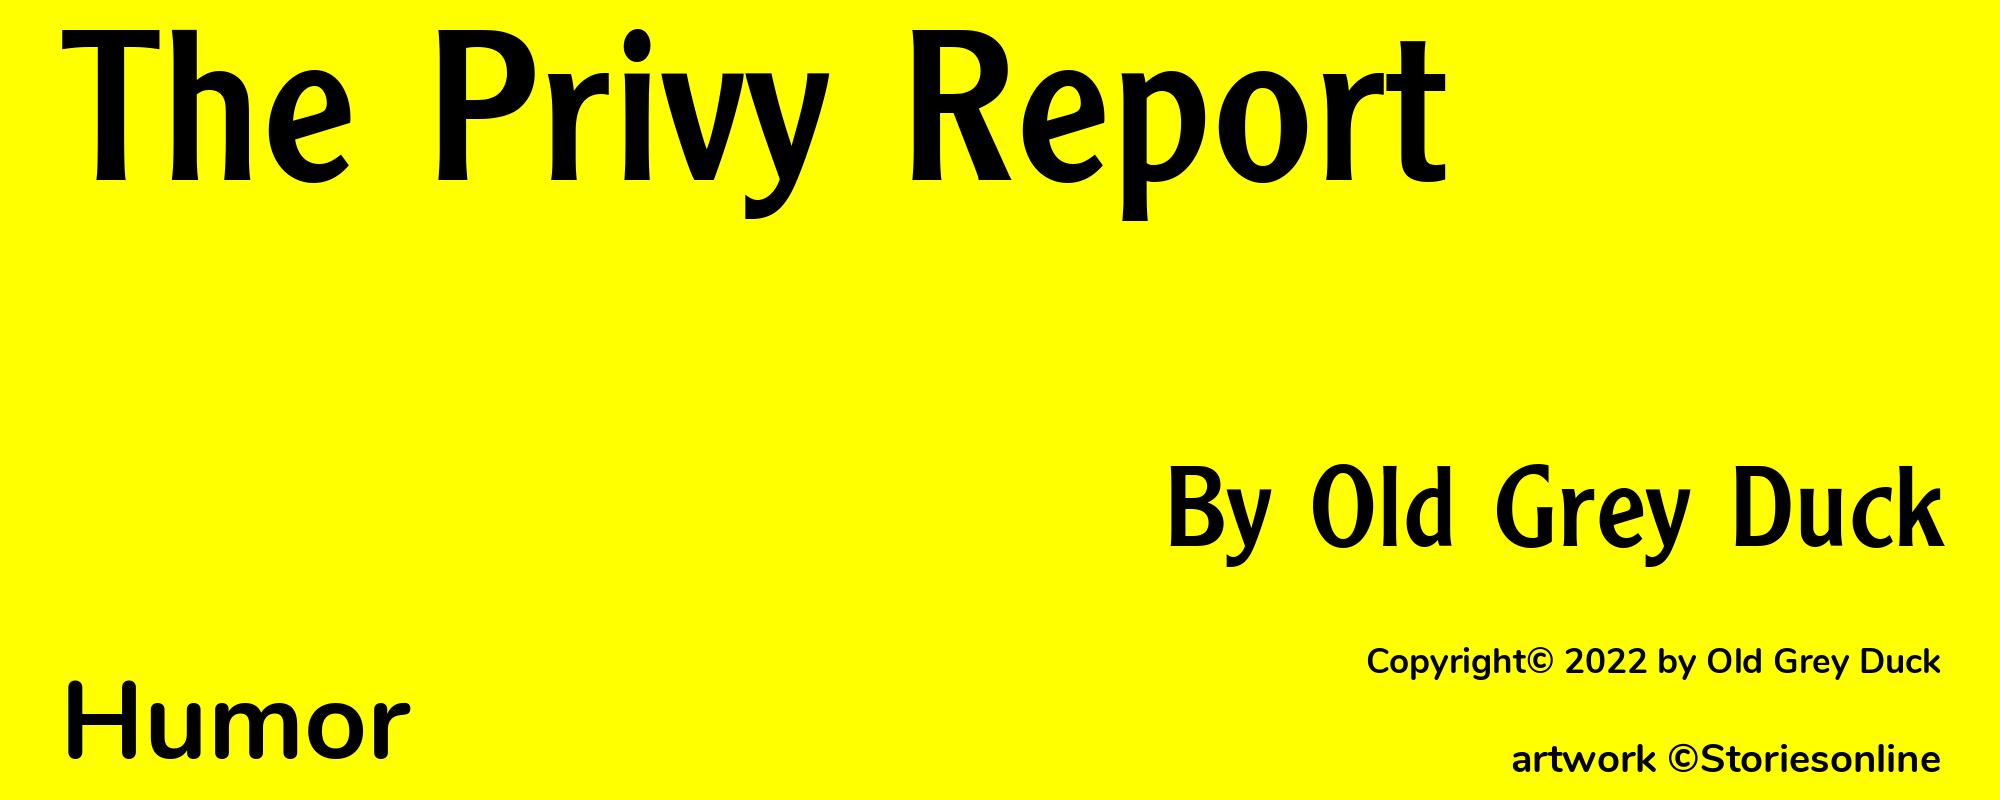 The Privy Report - Cover